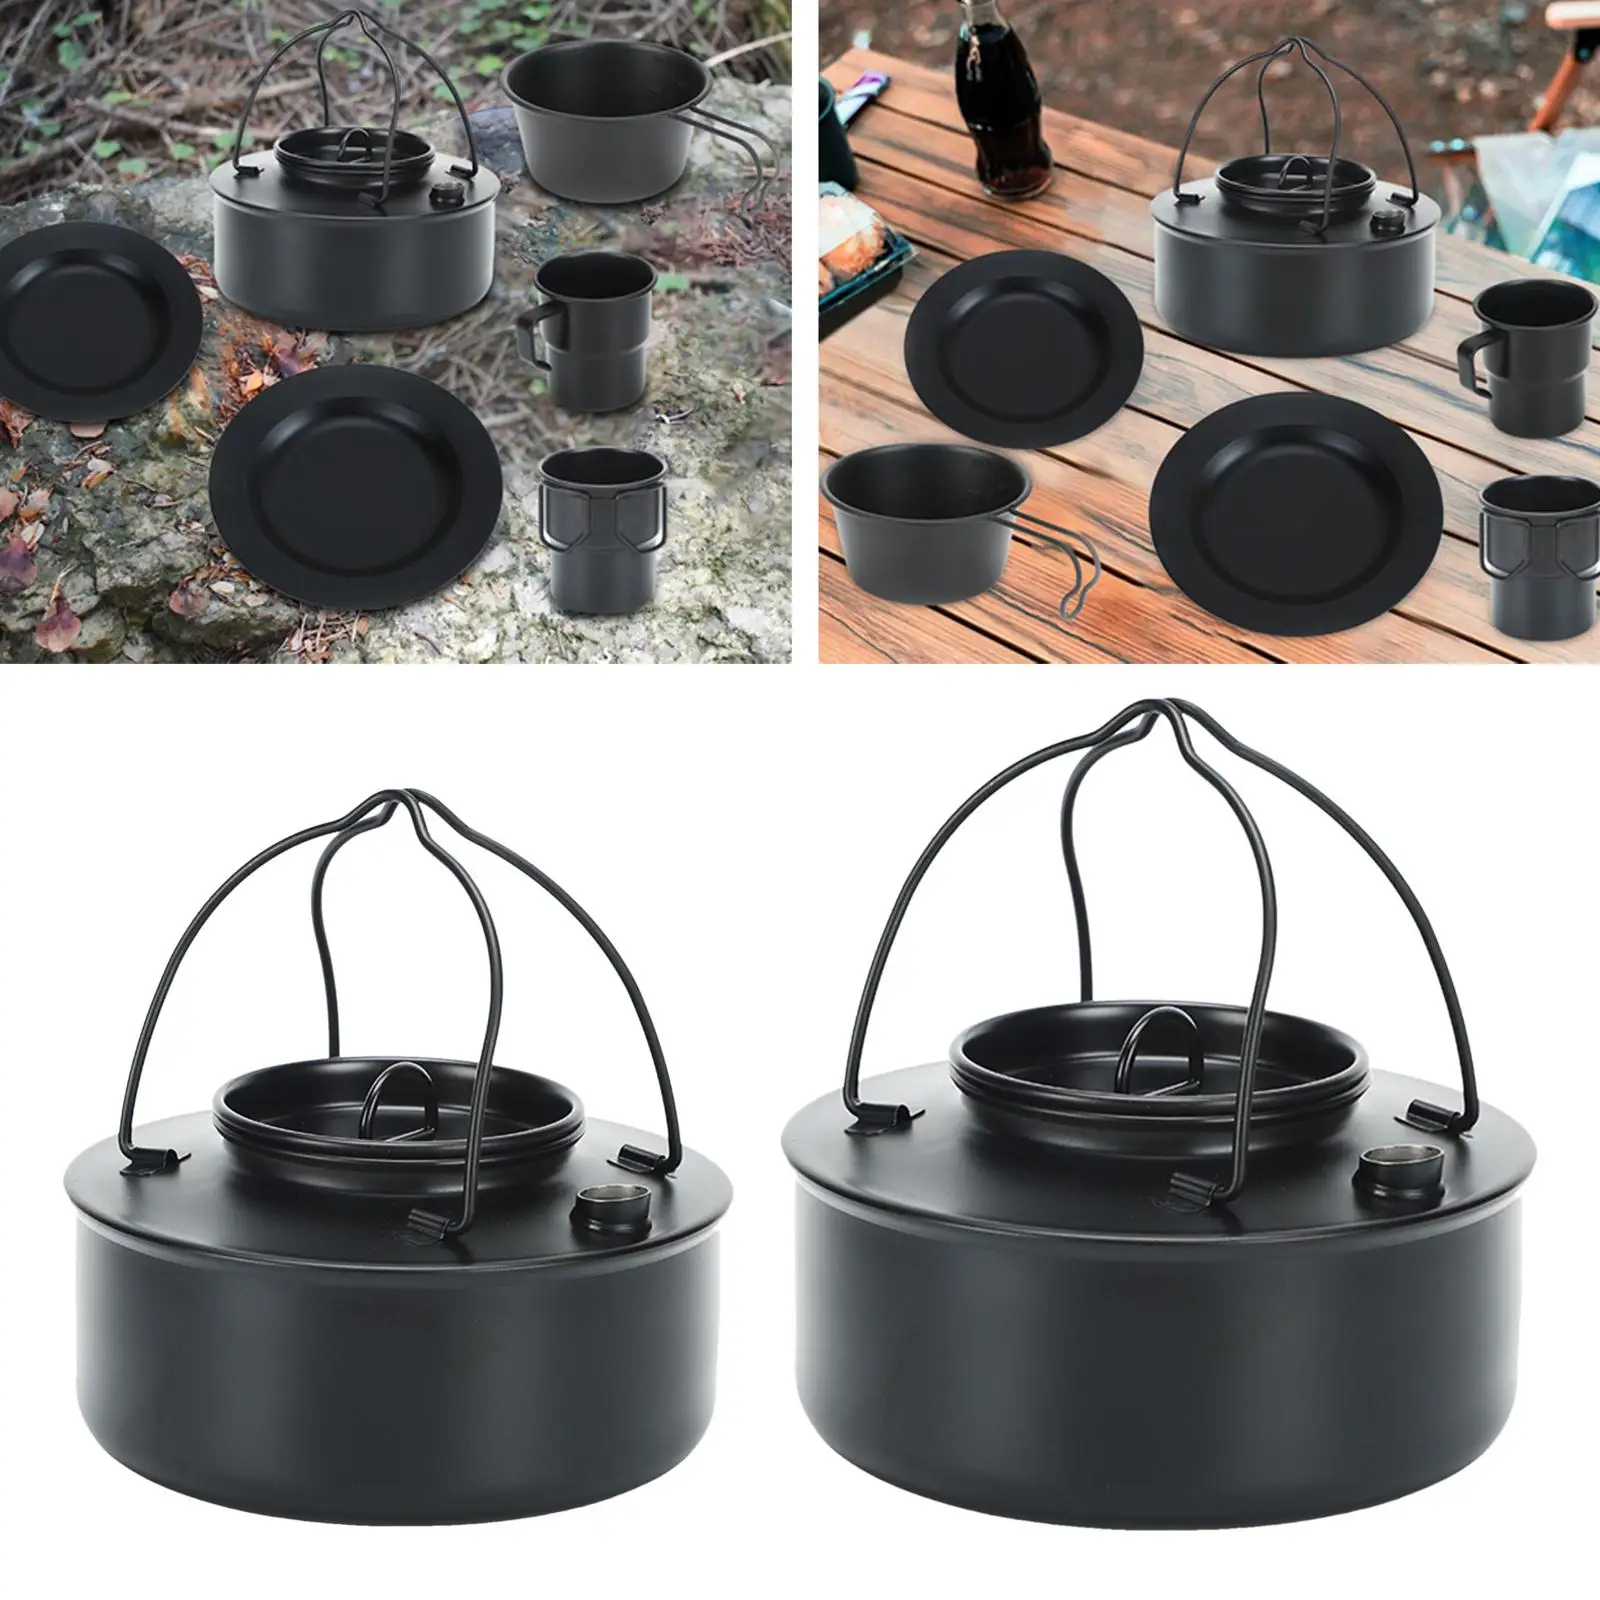 Outdoor Tea Coffee Pot Teapot Camping Stovetop Kettle for Backpacking Hiking